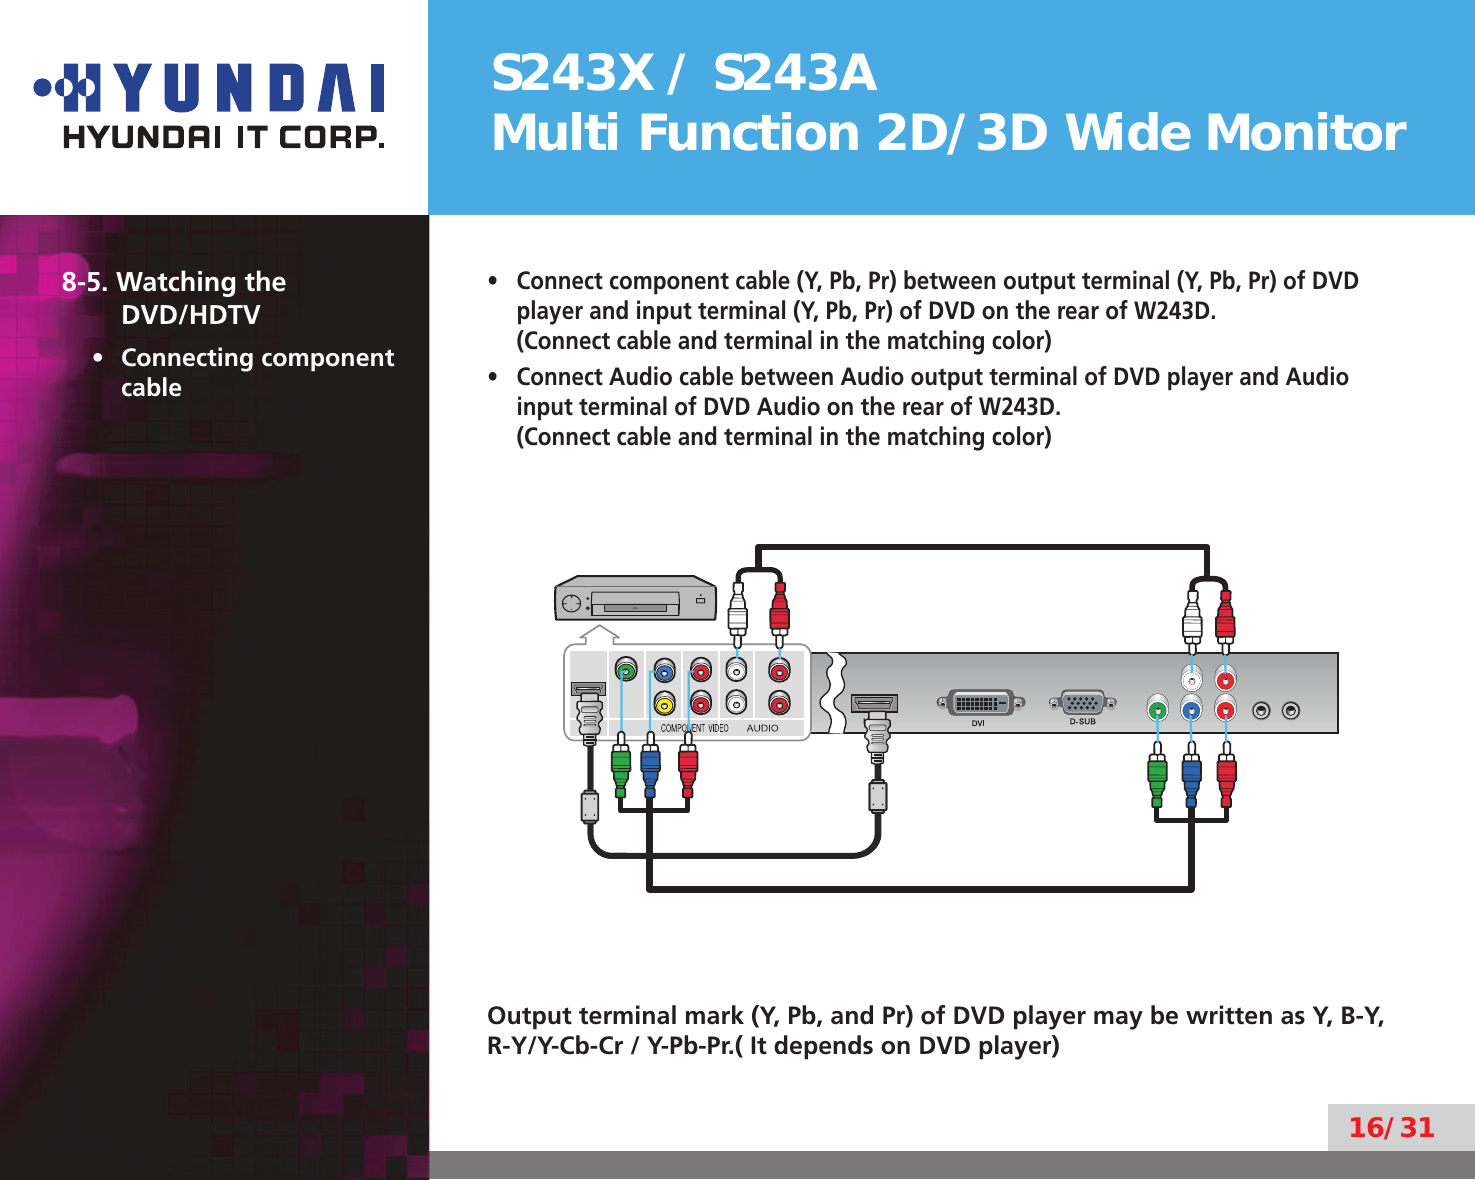 S243X / S243AMulti Function 2D/3D Wide Monitor16/318-5. Watching the  DVD/HDTVConnecting component • cableConnect component cable (Y, Pb, Pr) between output terminal (Y, Pb, Pr) of DVD • player and input terminal (Y, Pb, Pr) of DVD on the rear of W243D.  (Connect cable and terminal in the matching color)Connect Audio cable between Audio output terminal of DVD player and Audio • input terminal of DVD Audio on the rear of W243D.  (Connect cable and terminal in the matching color)Output terminal mark (Y, Pb, and Pr) of DVD player may be written as Y, B-Y, R-Y/Y-Cb-Cr / Y-Pb-Pr.( It depends on DVD player)